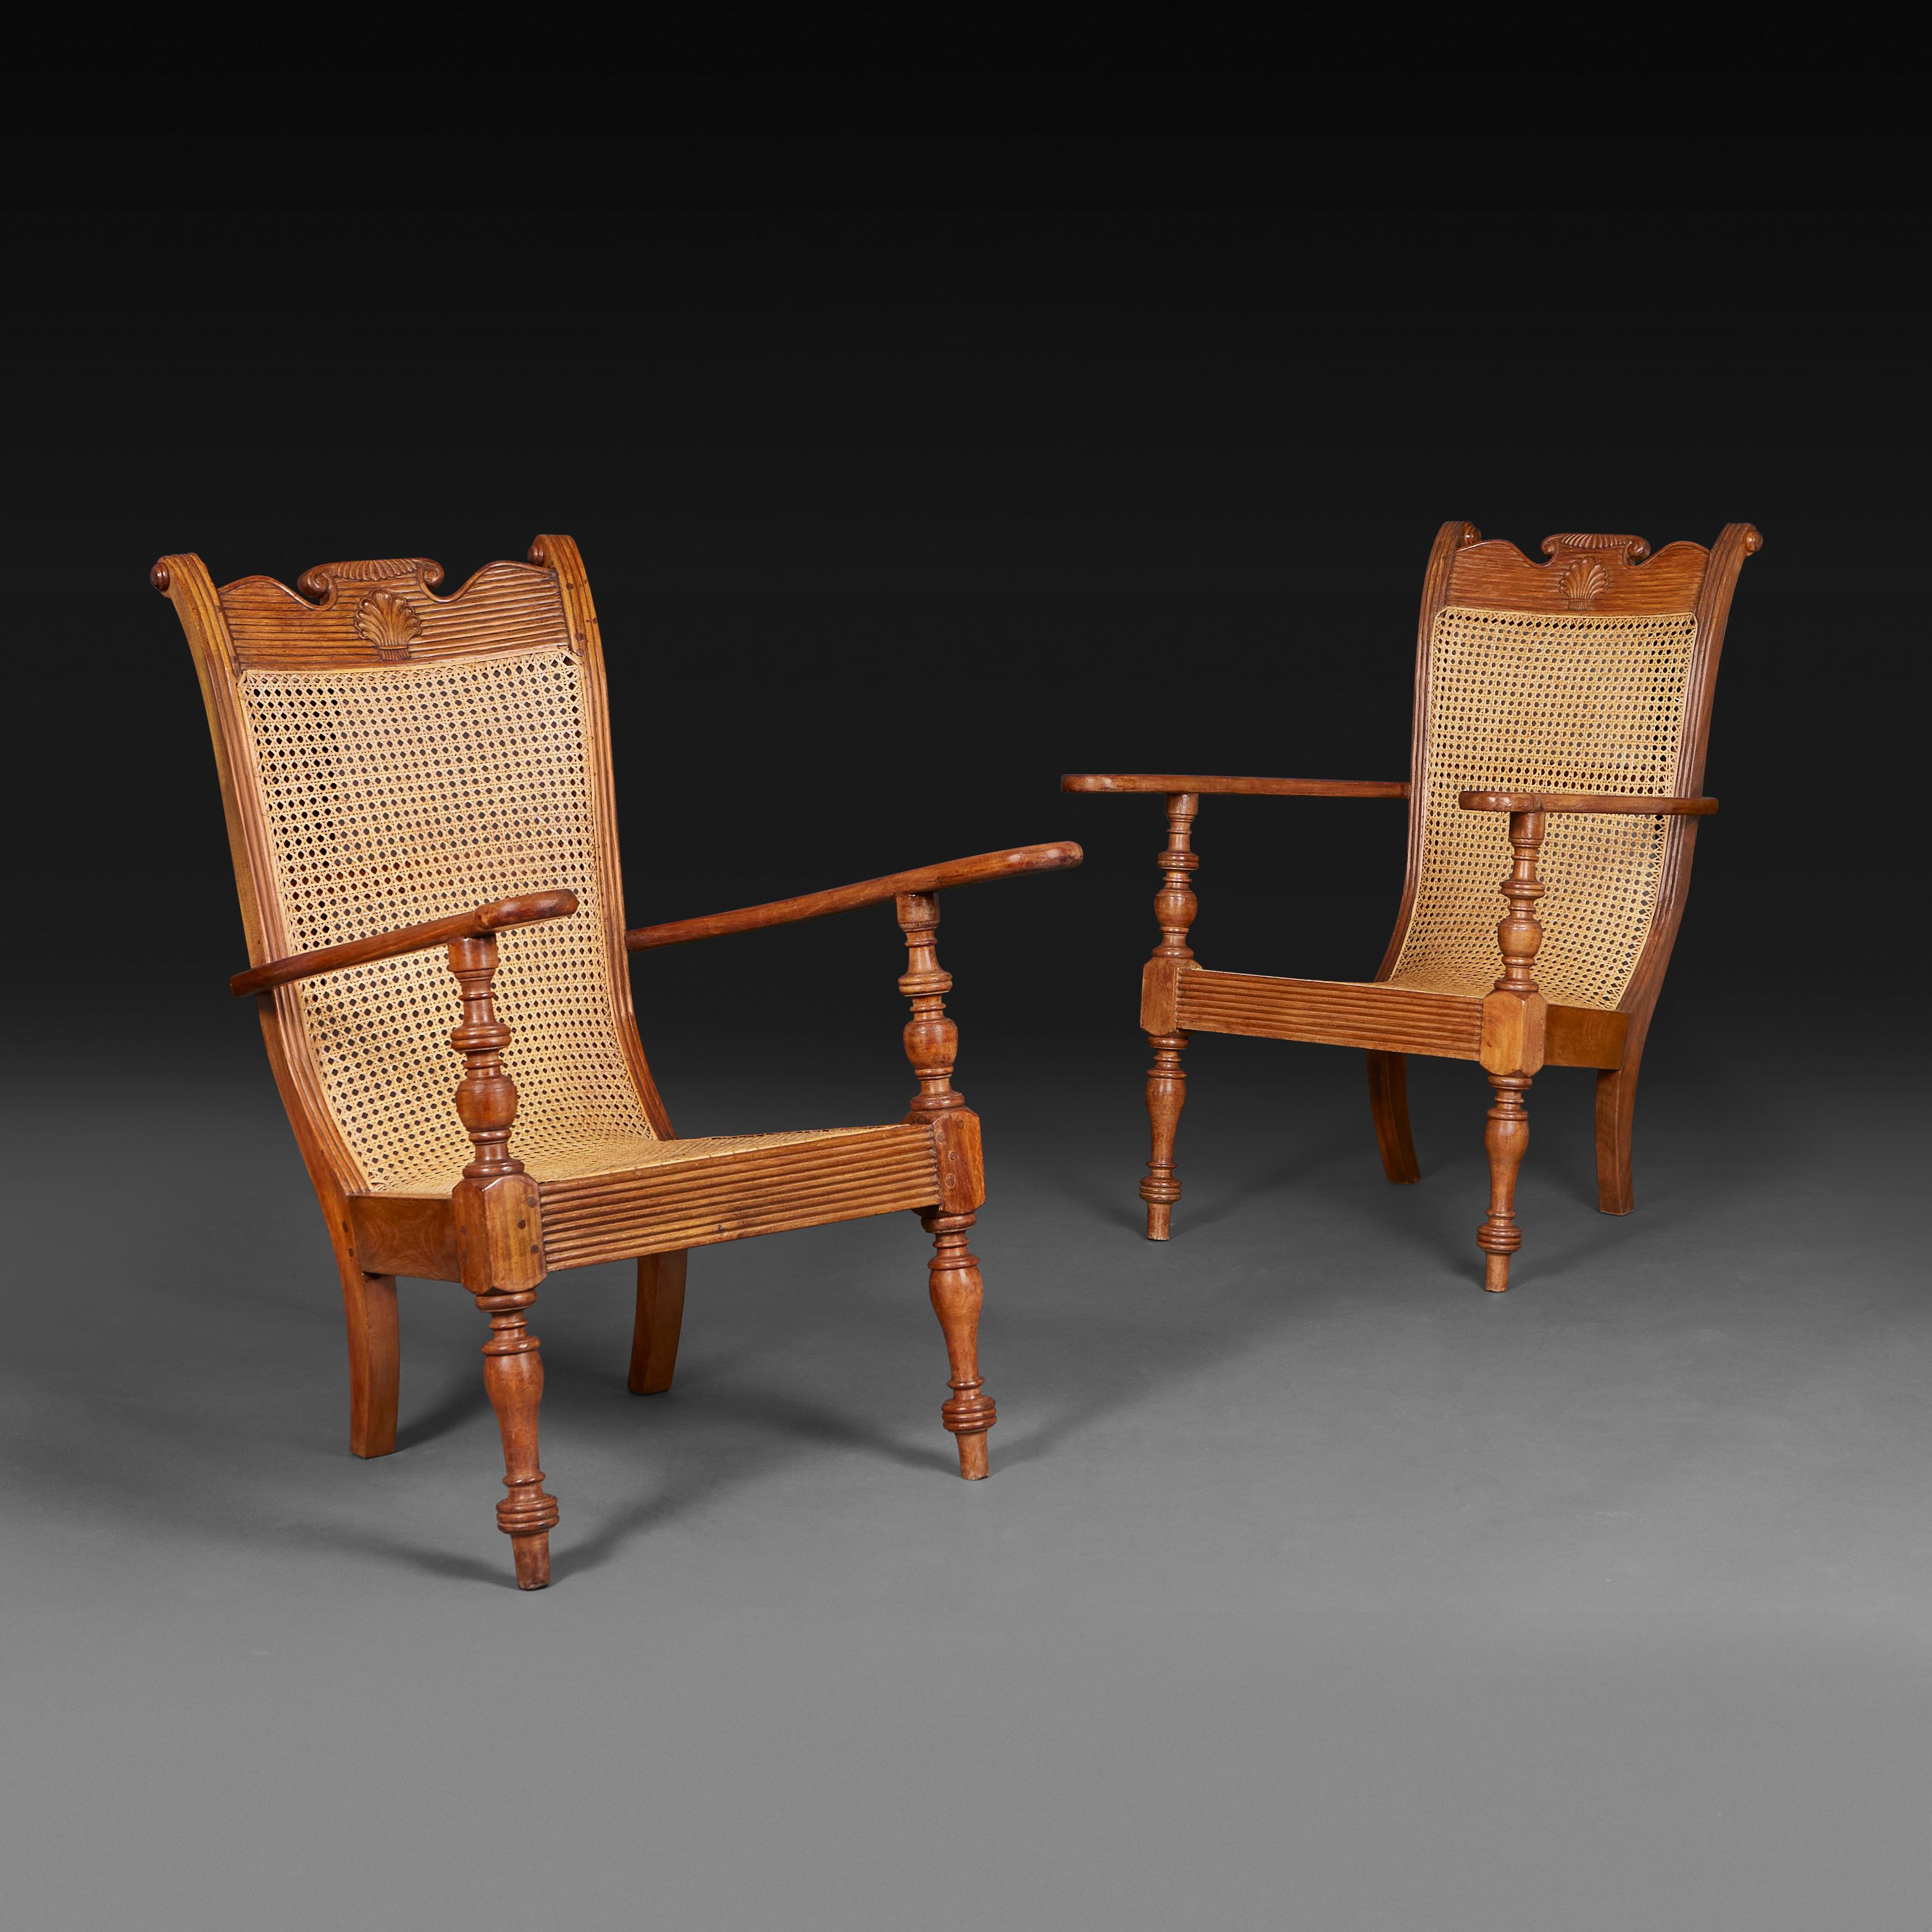 Sri Lanka, circa 1920

A pair of 20th century Sri Lankan sling back planters chairs in the British colonial style, the frames in solid teakwood with a shell motives carved to the backrest and the seats with their original caning. 

Height   